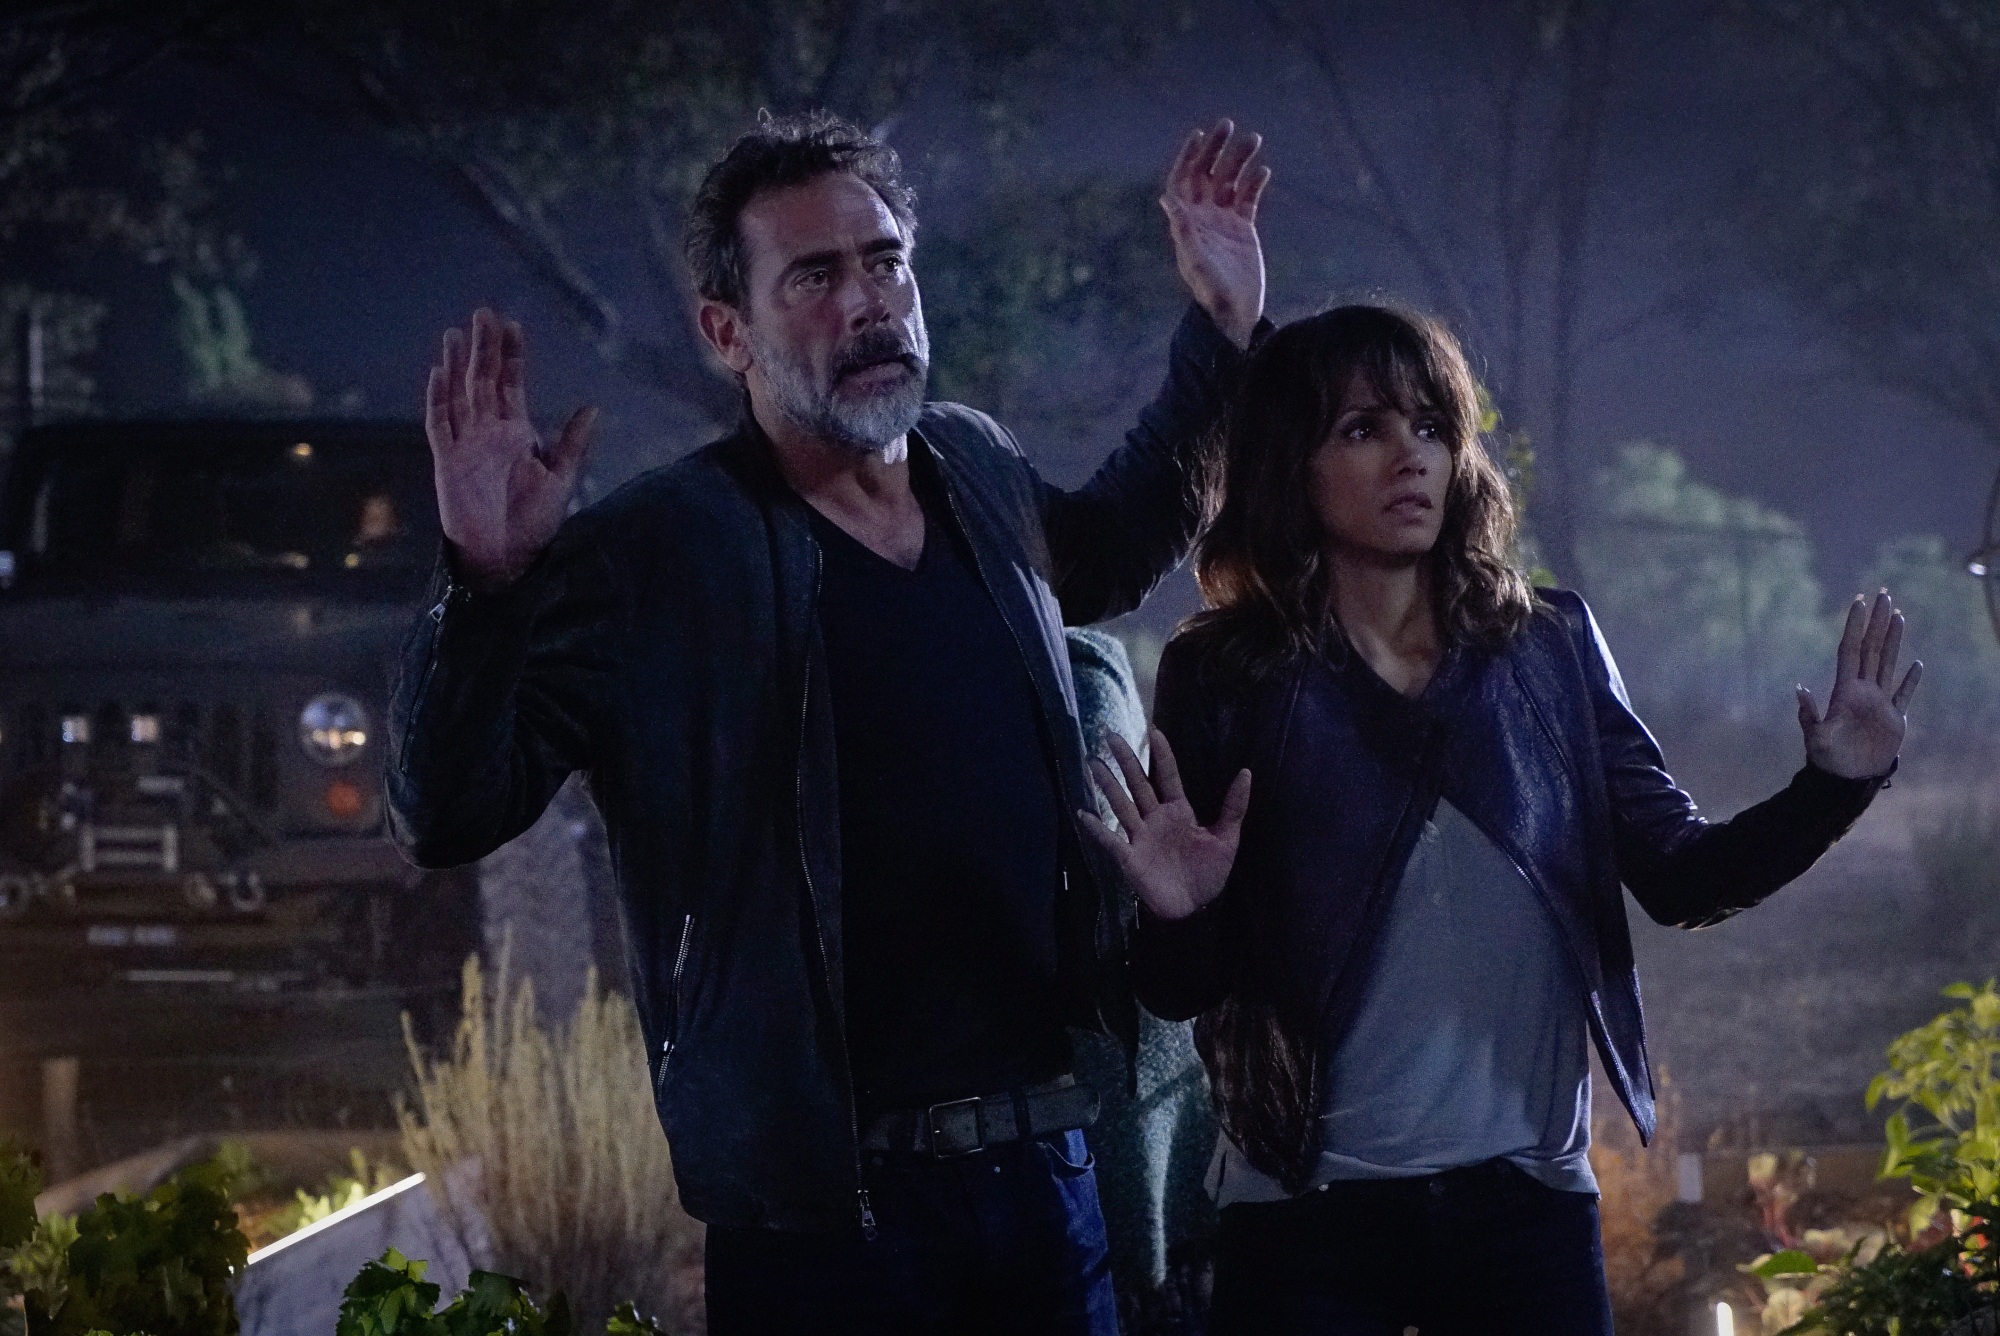 Jeffrey Dean Morgan as JD Richter and Halle Berry as Molly Woods.